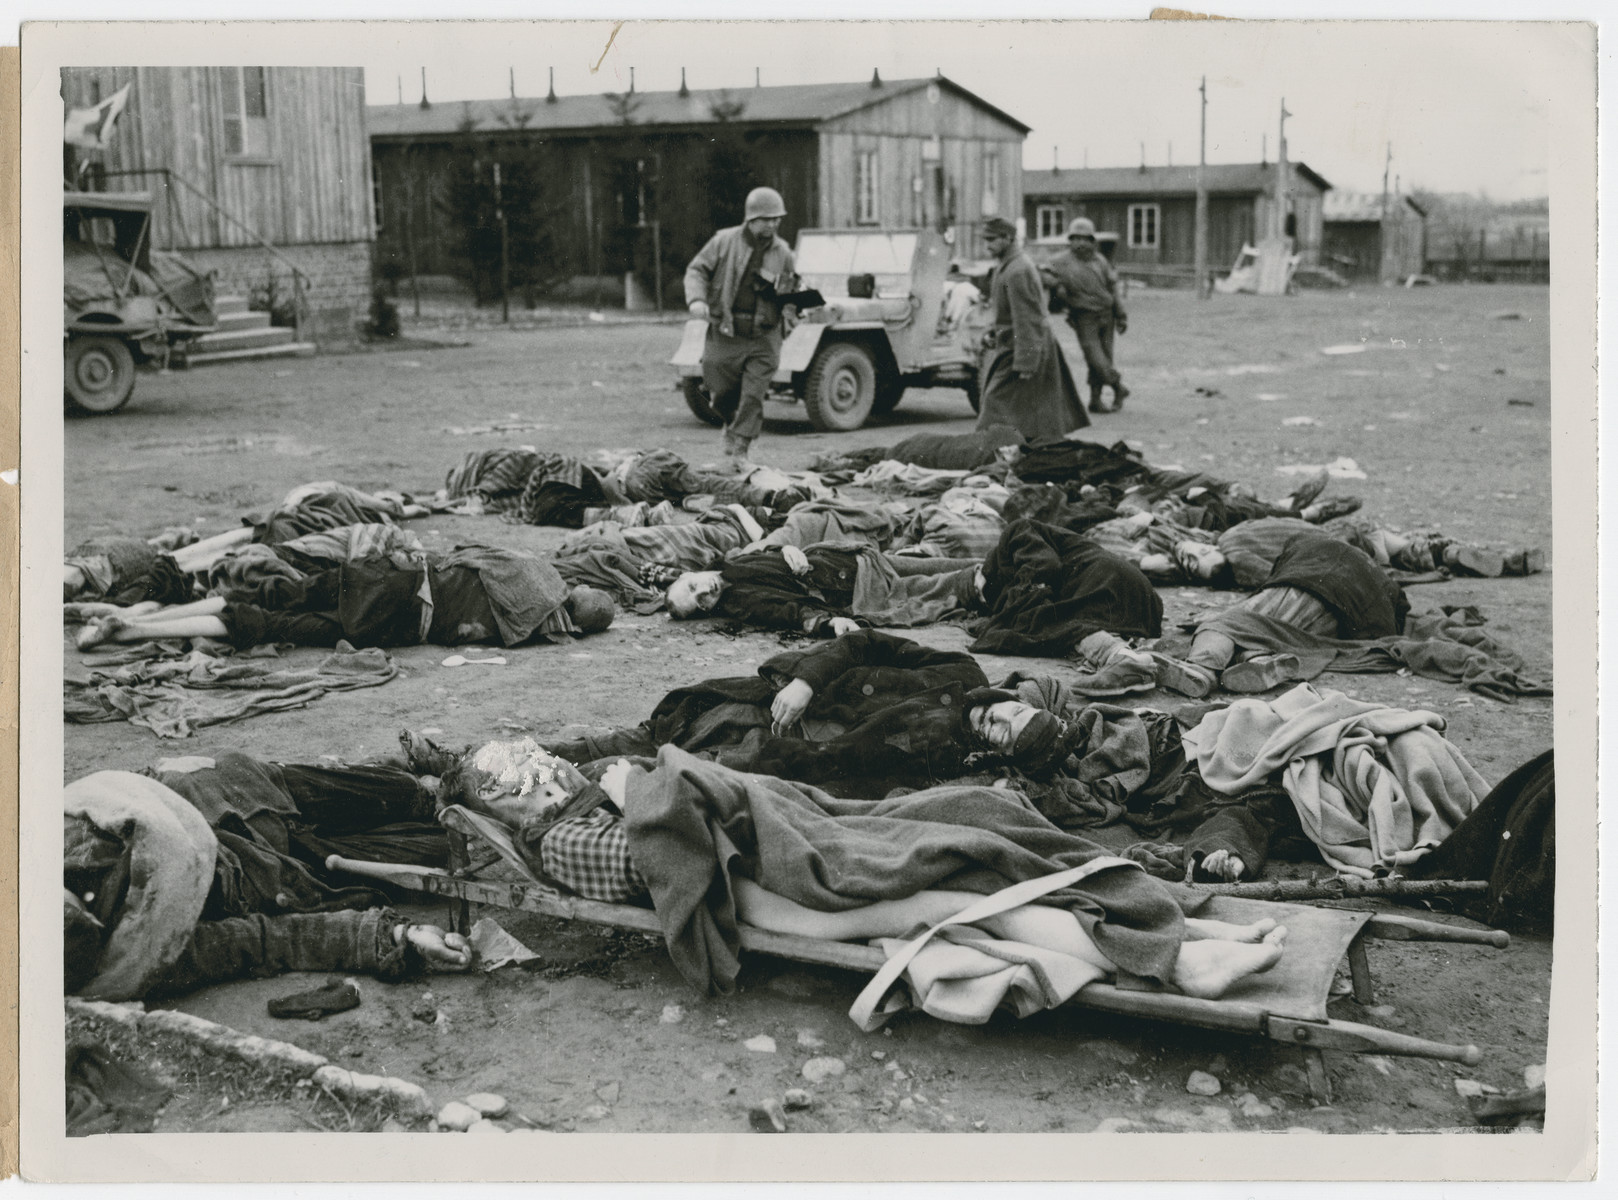 The U.S. Army inspects bodies of slain prisoners at the Ohrdruf concentration camp.

Original caption reads:  "Here are the bodies of some of the slain prisoners.  The case of the man on the litter in the foreground is being carefully investigated.  According to survivors, this man always said he was an American, and he is believed to have been either a flyer or a paratrooper".